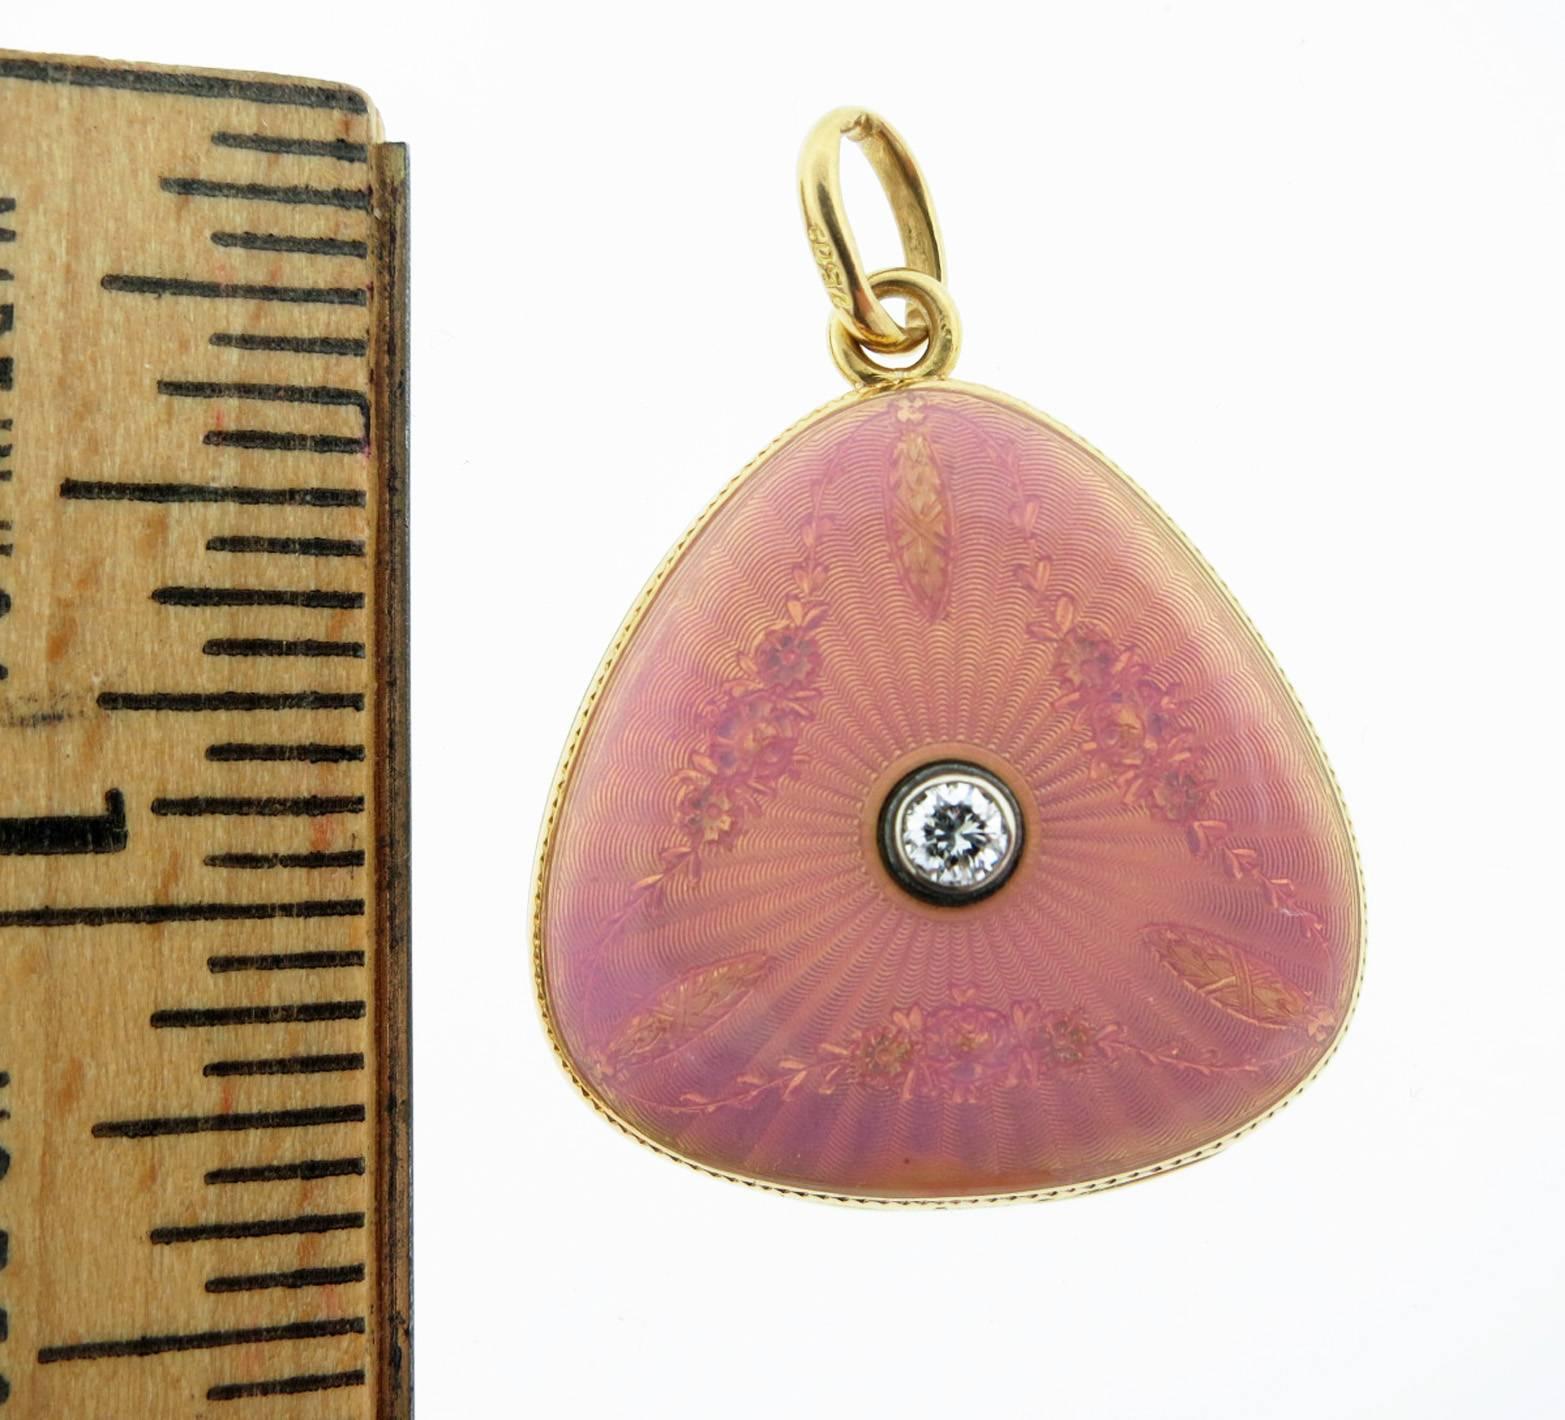 Lovely Art Nouveau double frame 18kt. yellow gold, feminine and softly curved peach color guilloche enamel locket. The locket measures approx 1 1/4 inches in length and is bezel set with a center diamond weighing approx .20cts. Circa 1900.